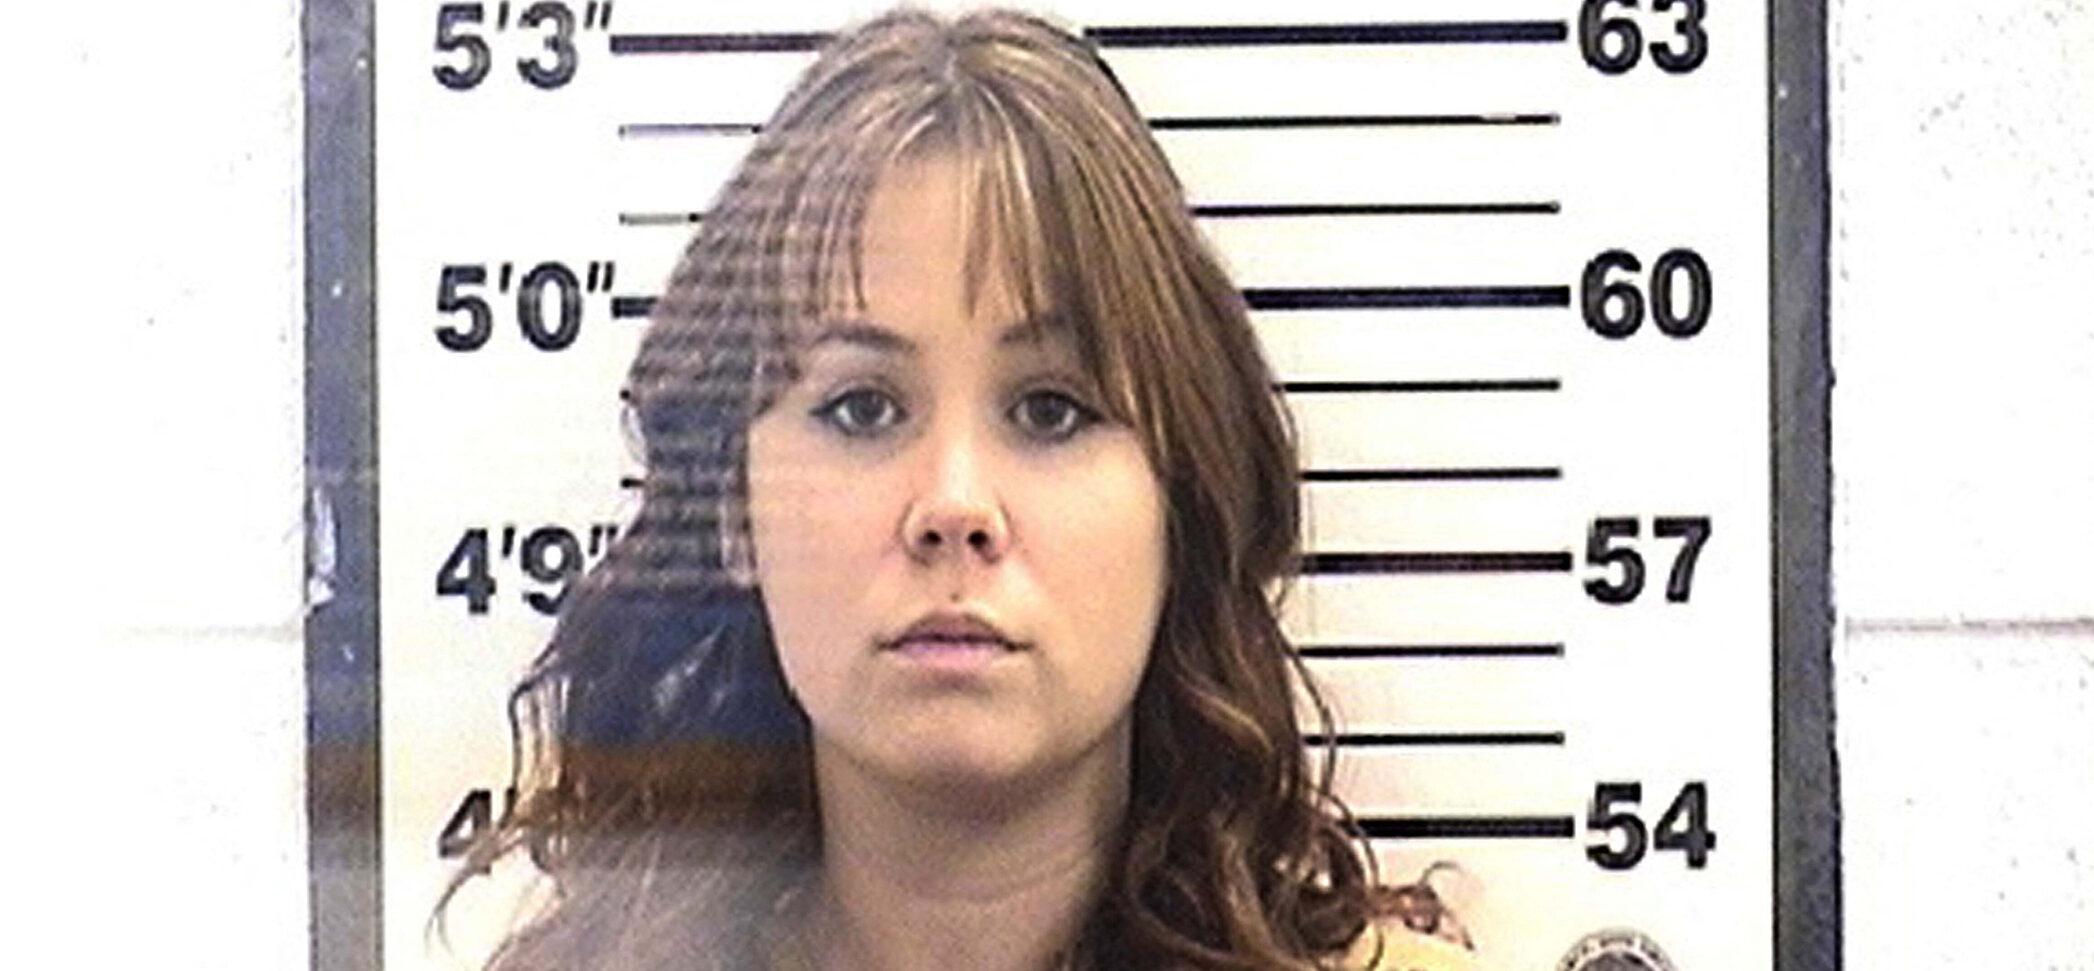 ‘Rust’ Armorer Hannah Gutierrez-Reed Wants Out Of Prison While Awaiting Appeal